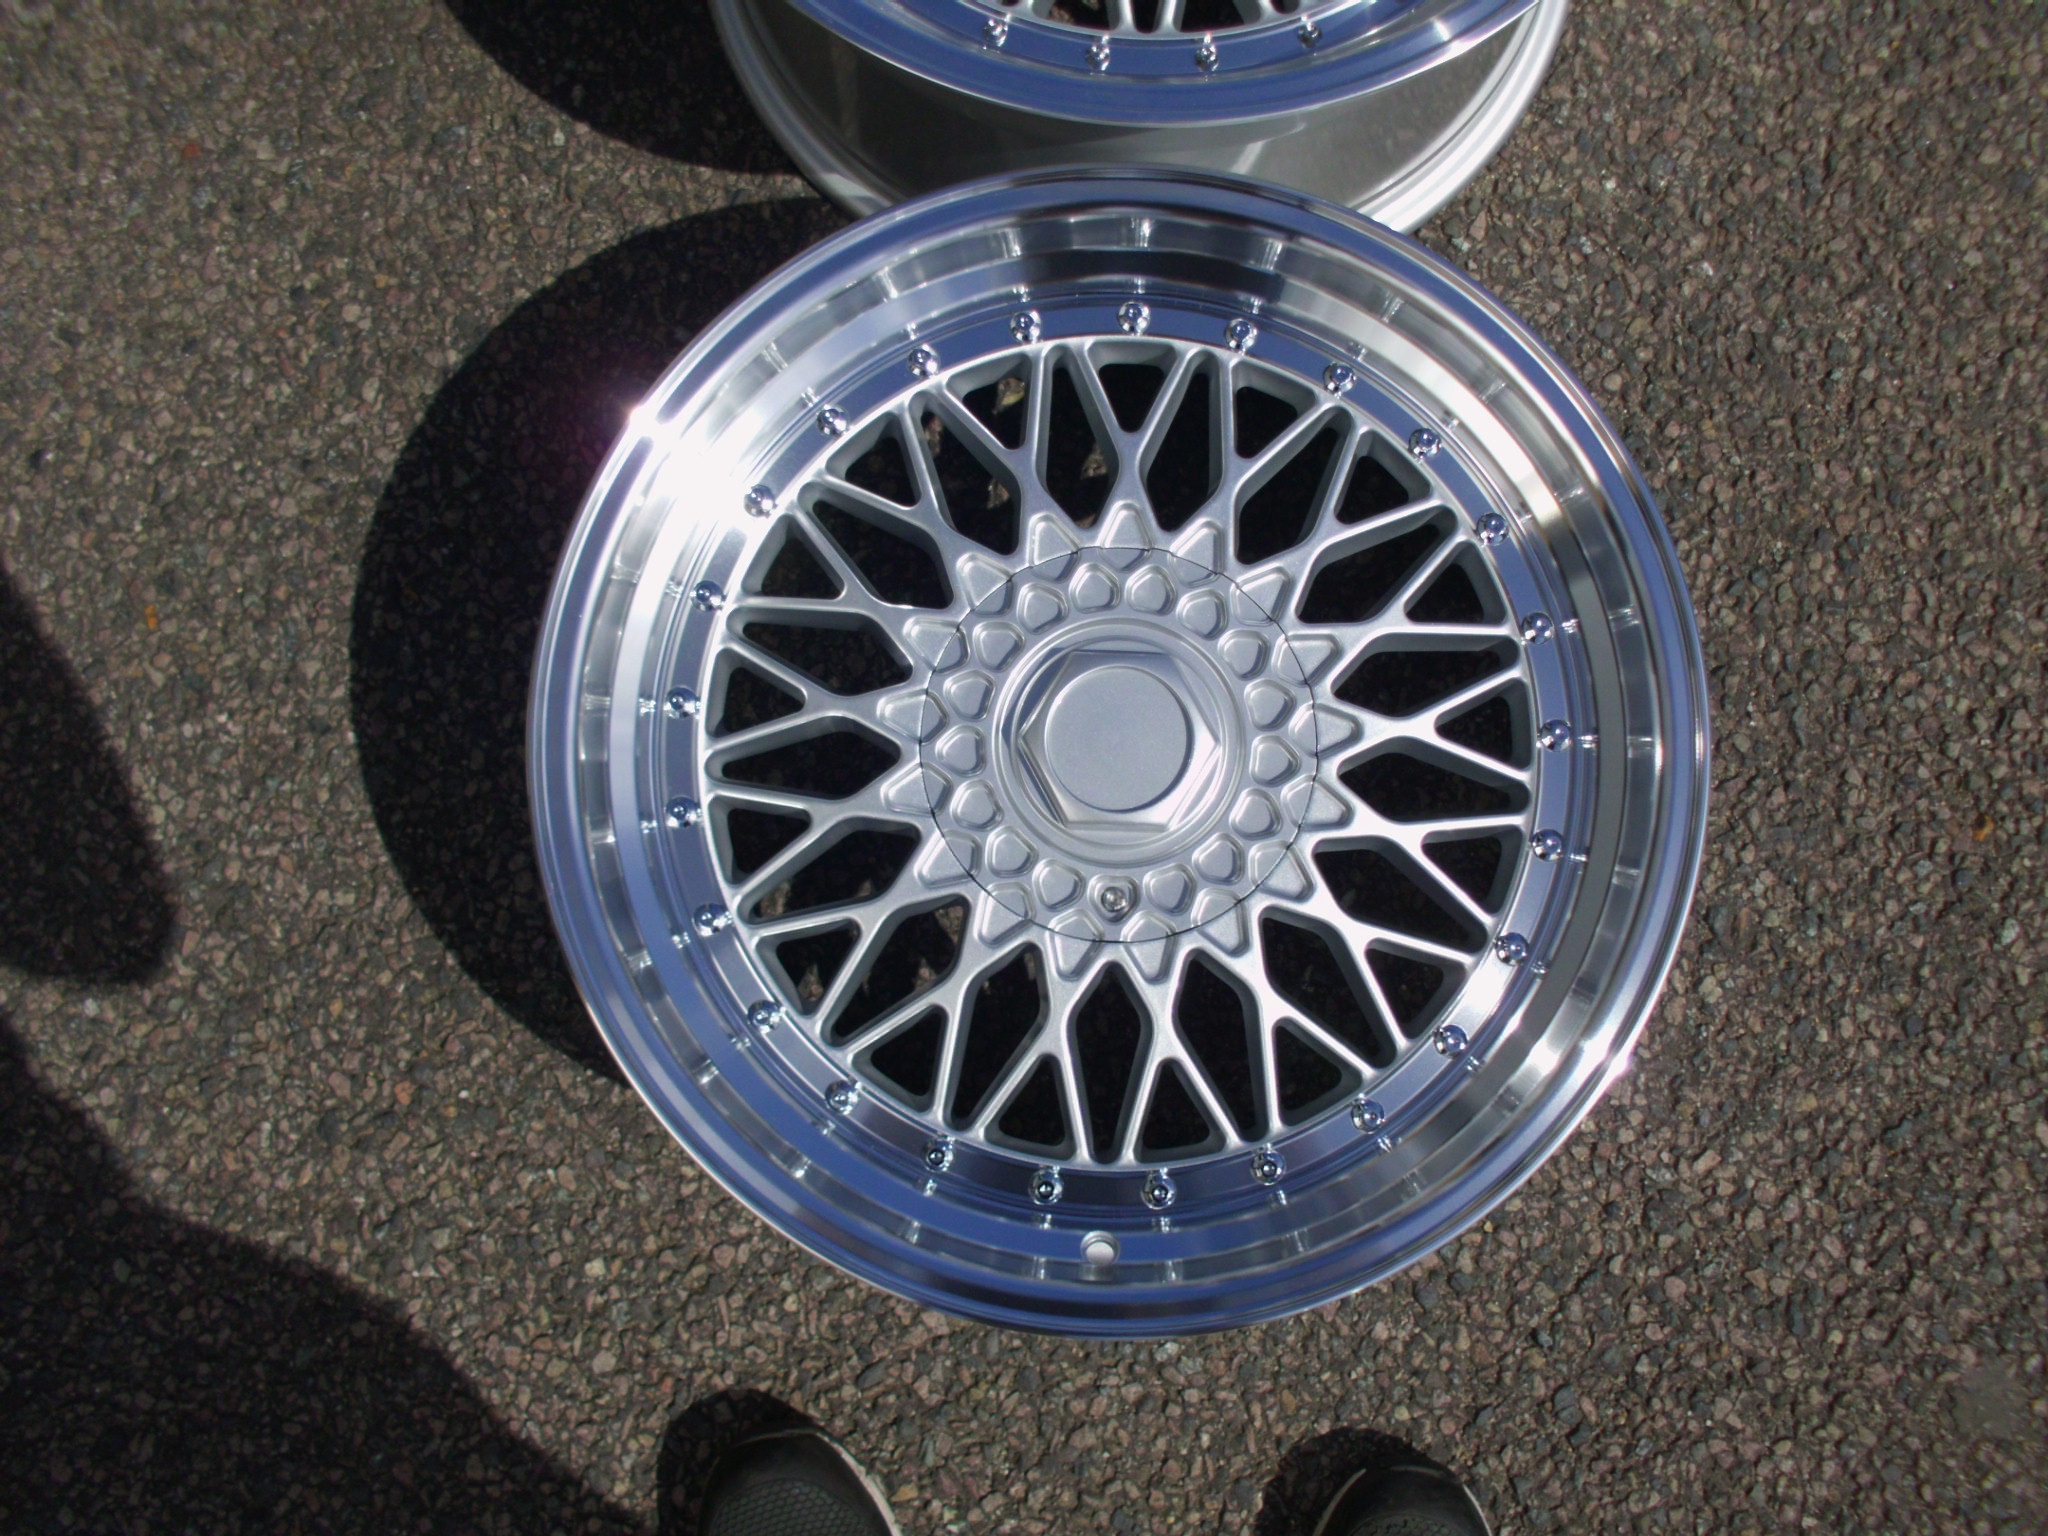 NEW 18  RS STYLE ALLOY WHEELS IN SILVER POLISHED WITH CHROME RIVETS  DEEP DISH 9 5  REAR   et35 40